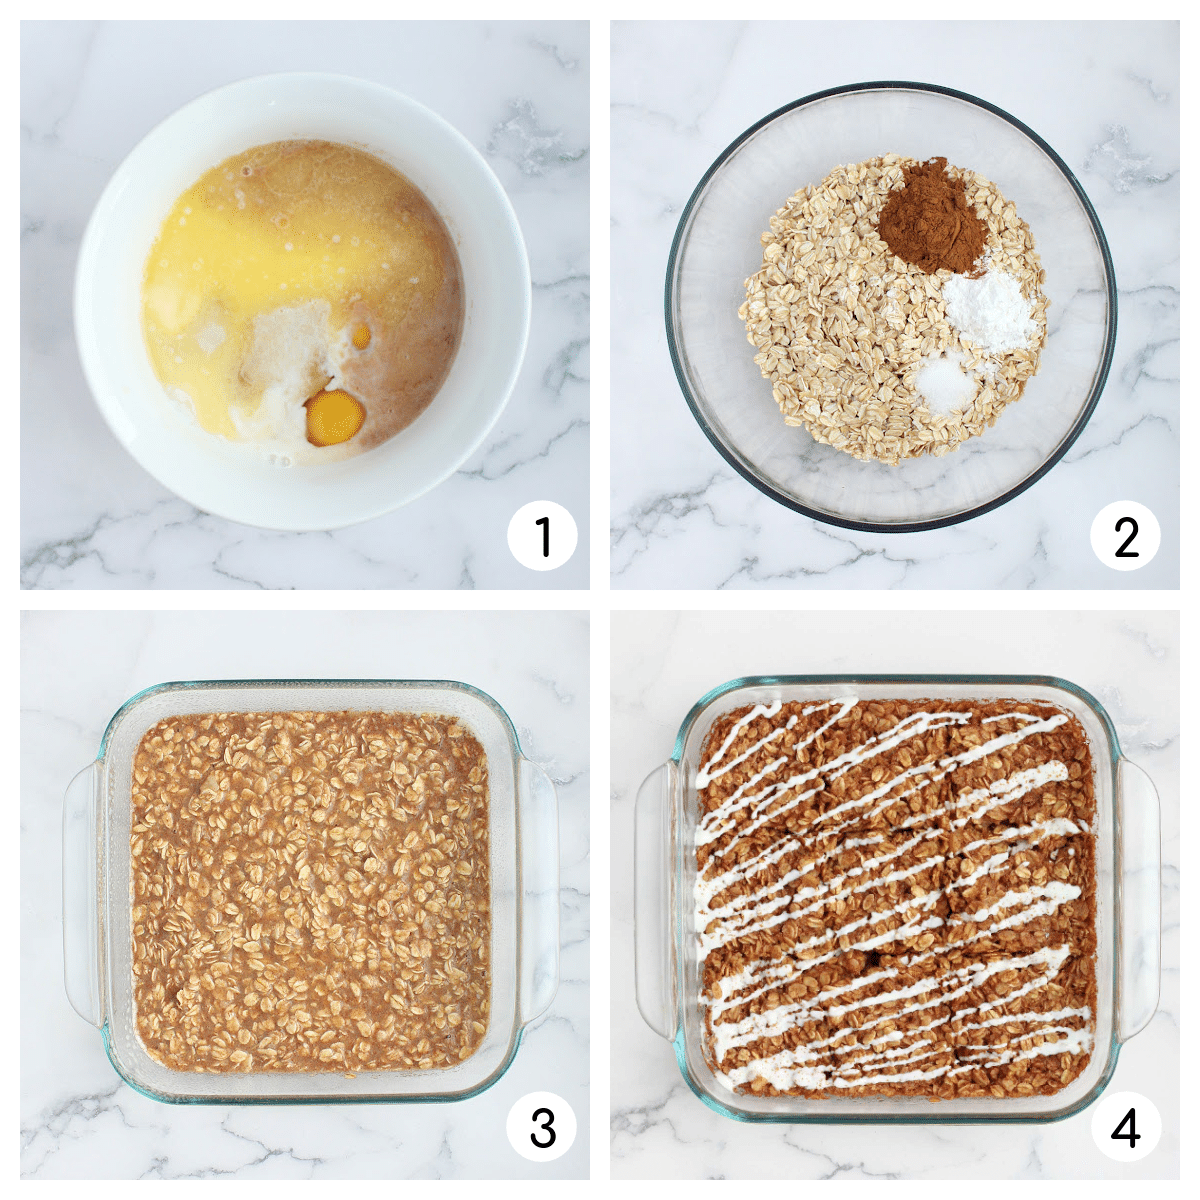 Process shots of how to make baked oatmeal cinnamon rolls